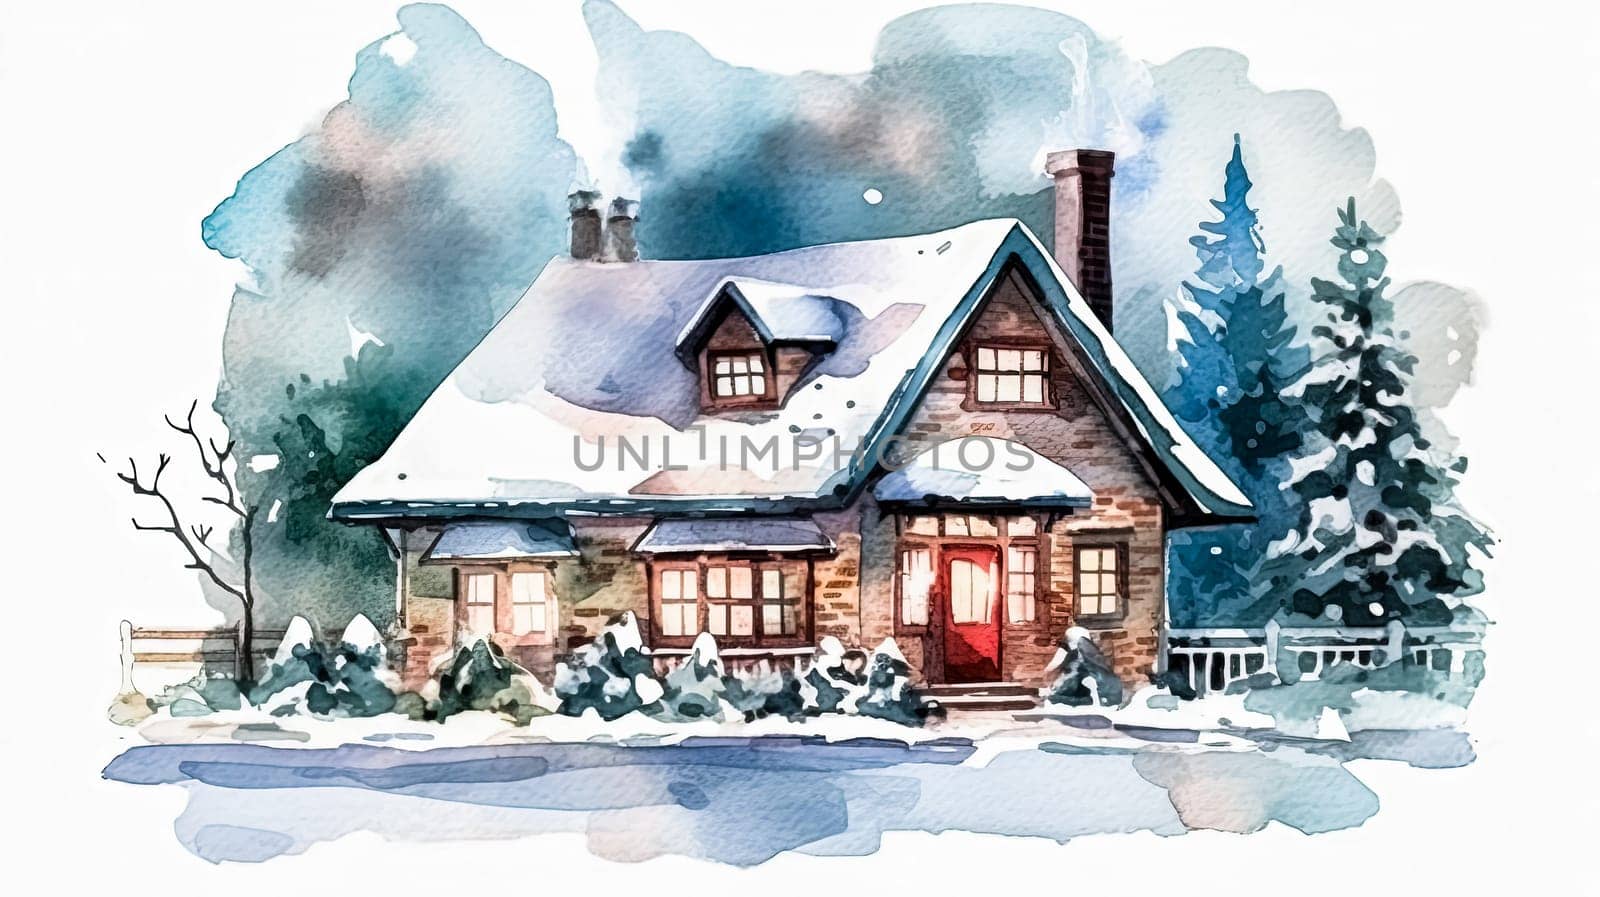 A cozy house nestled in a snowy forest, surrounded by Christmas trees a festive haven before the joyous holiday season